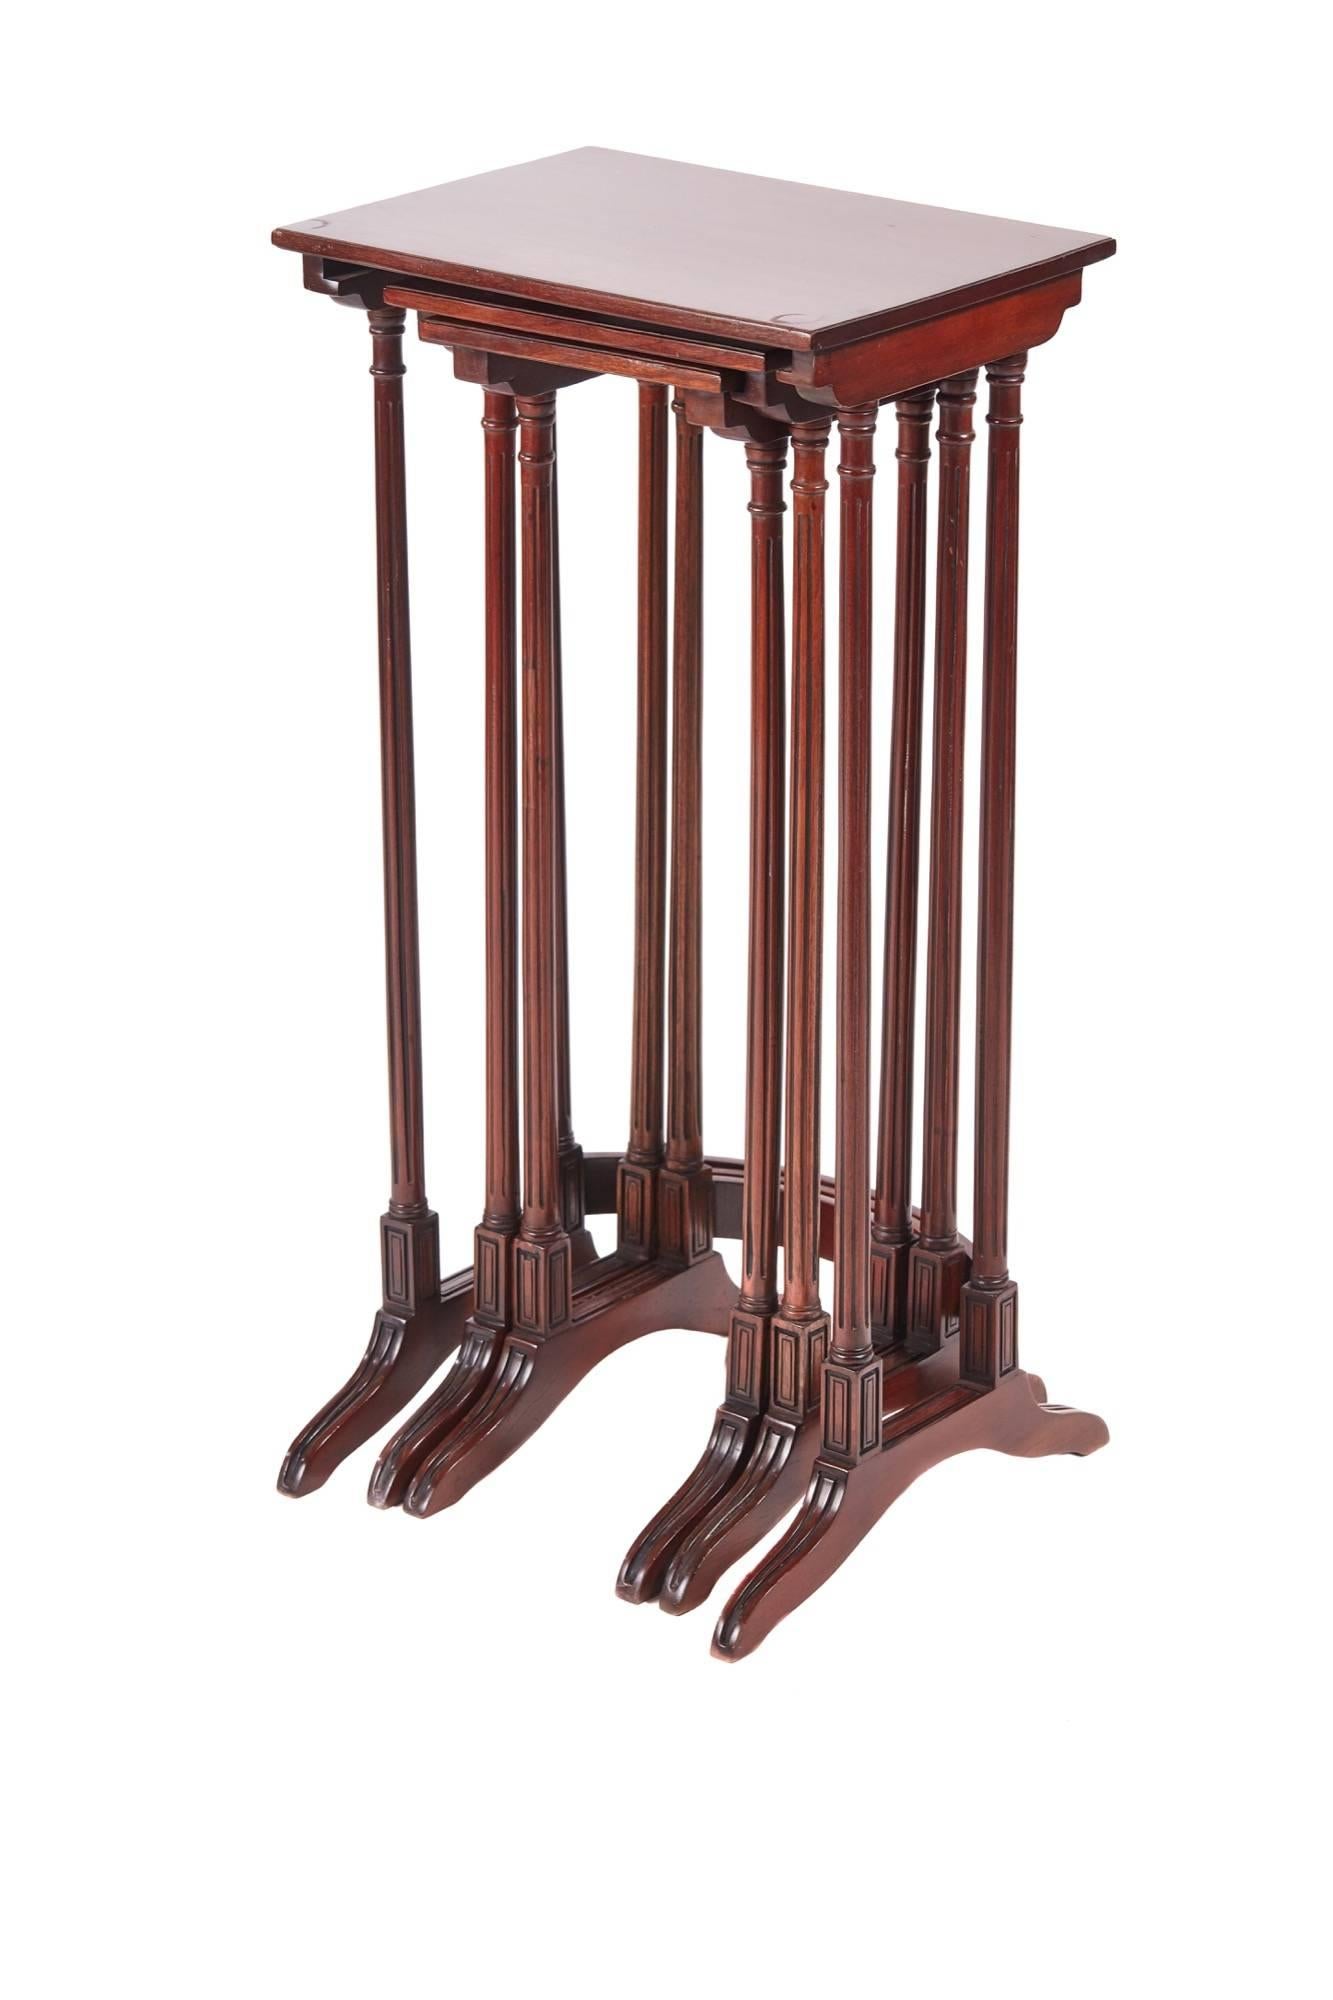 Quality antique mahogany nest of three tables, with lovely mahogany tops, supported on lovely elegant reeded turned columns, standing on lovely shaped reeded legs united by a shaped stretcher.